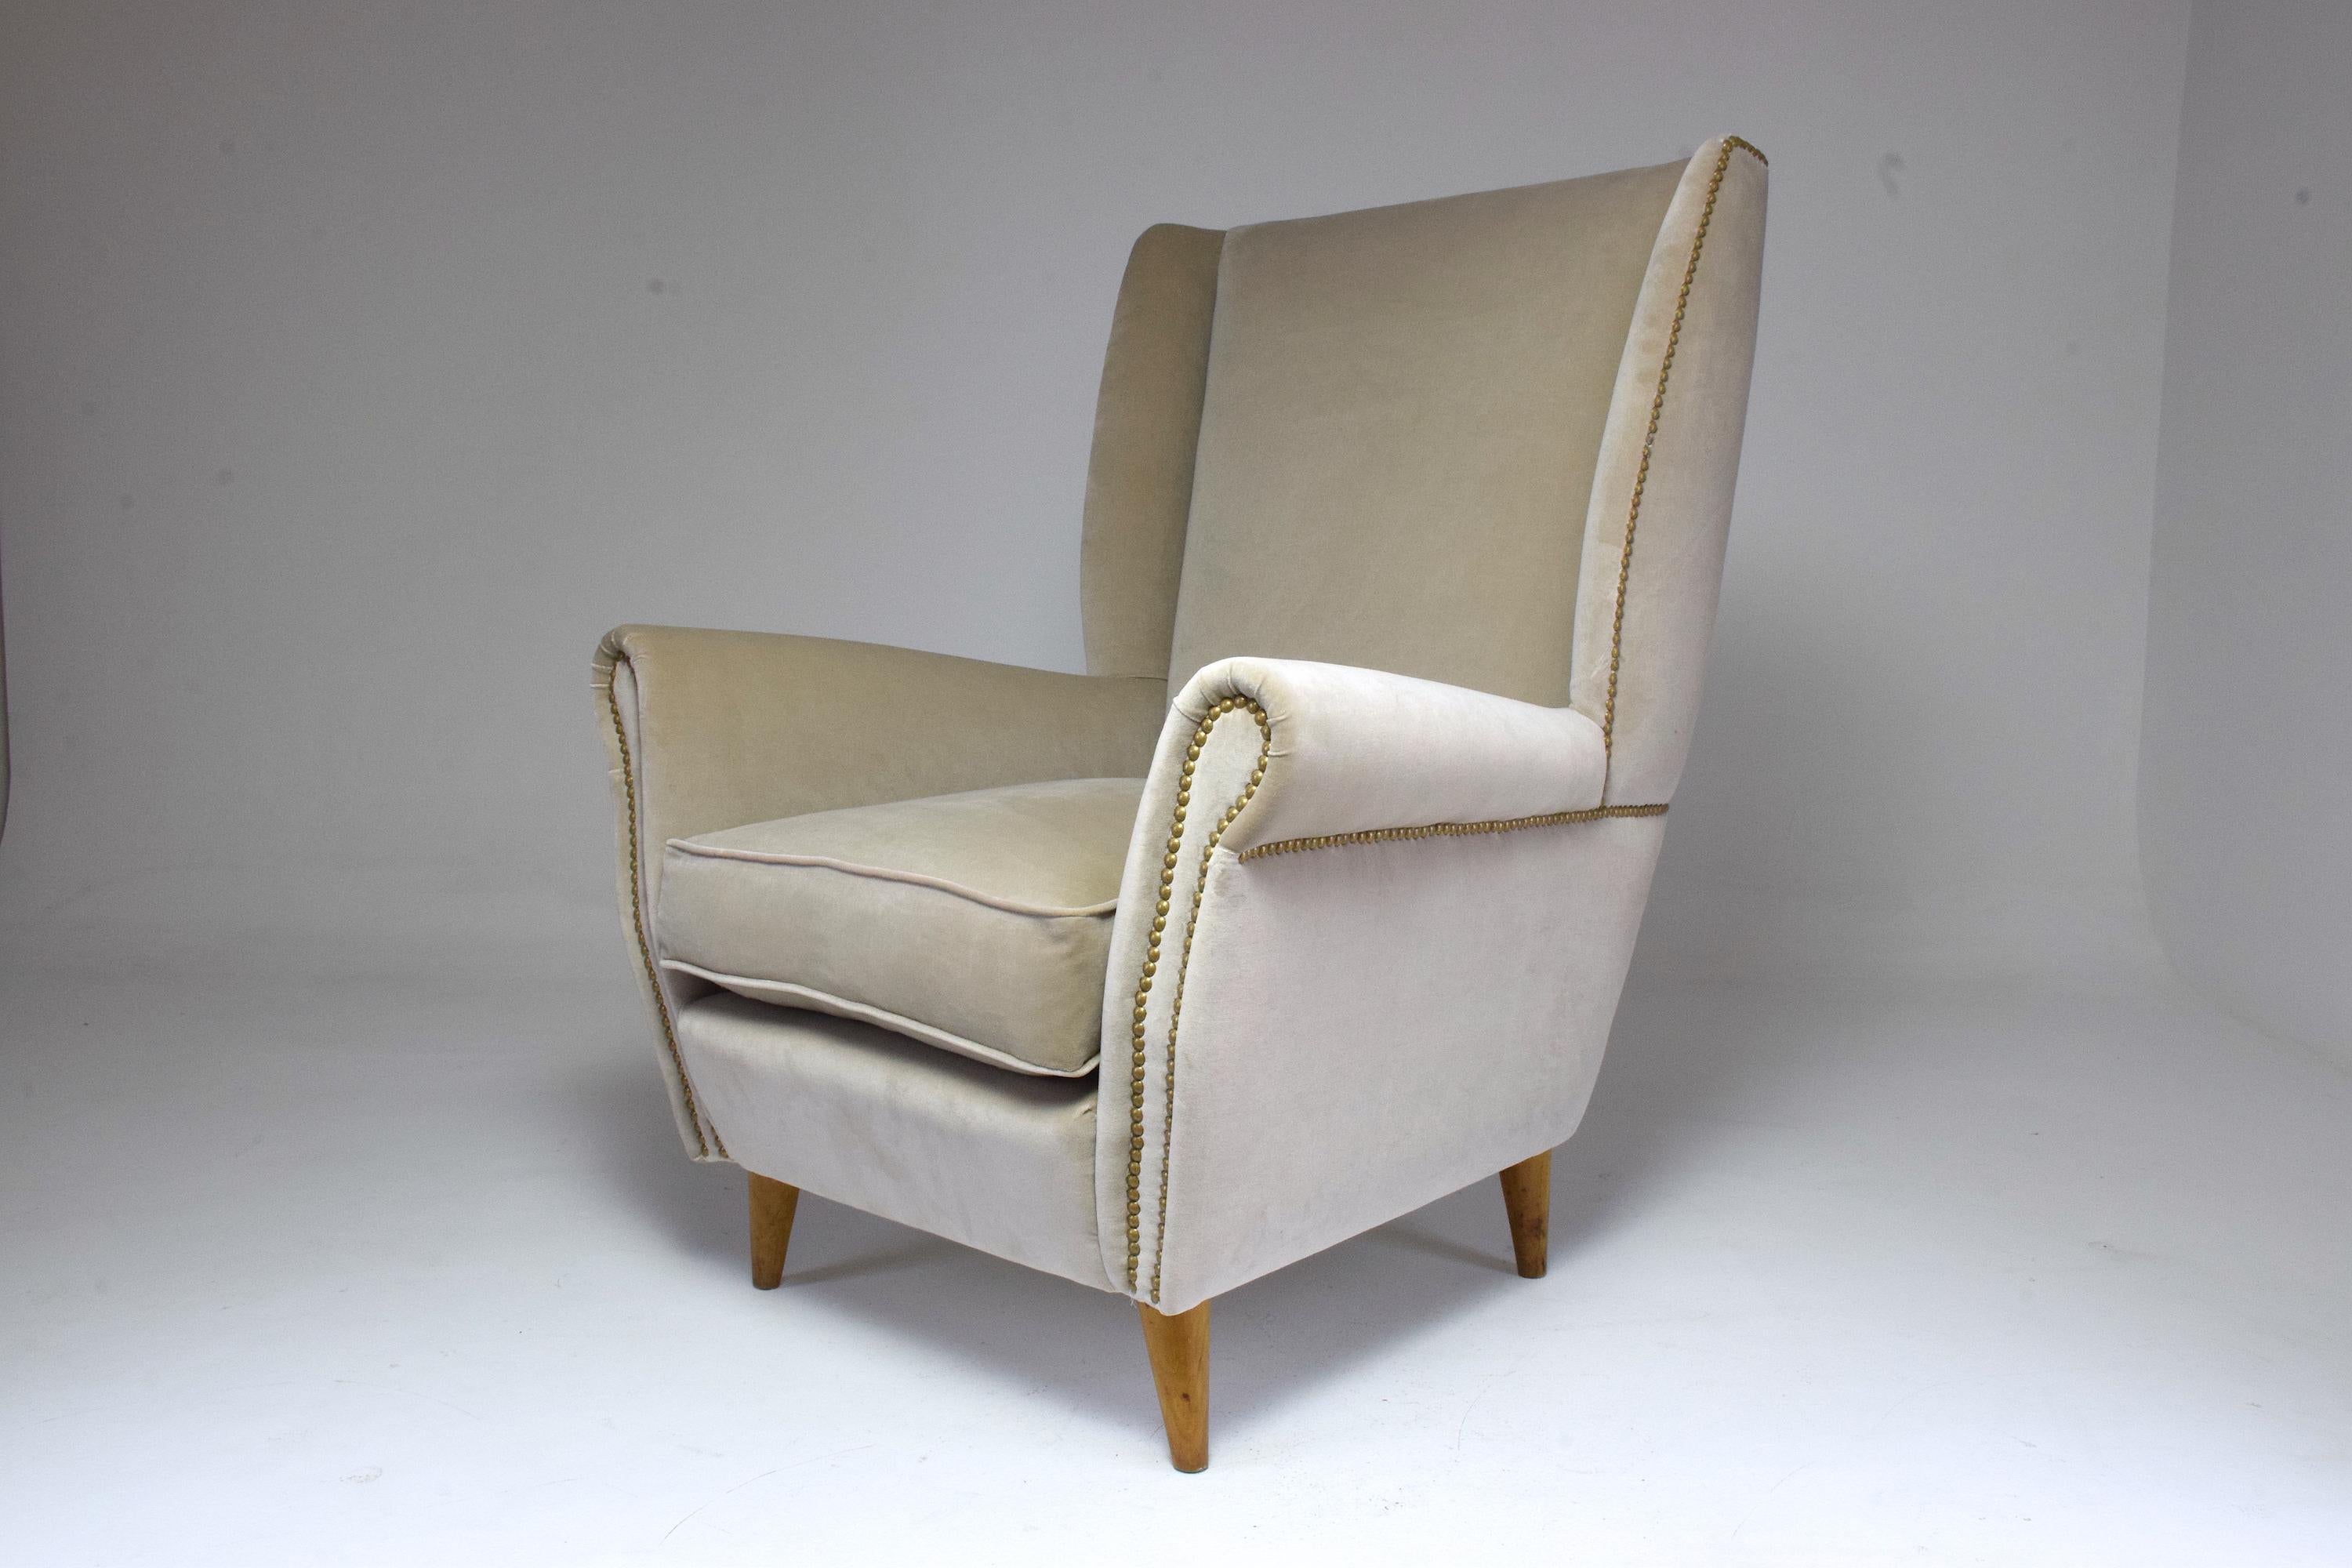 Velvet Pair of 20th Century Armchairs In the Style of Gio Ponti, 1940s For Sale